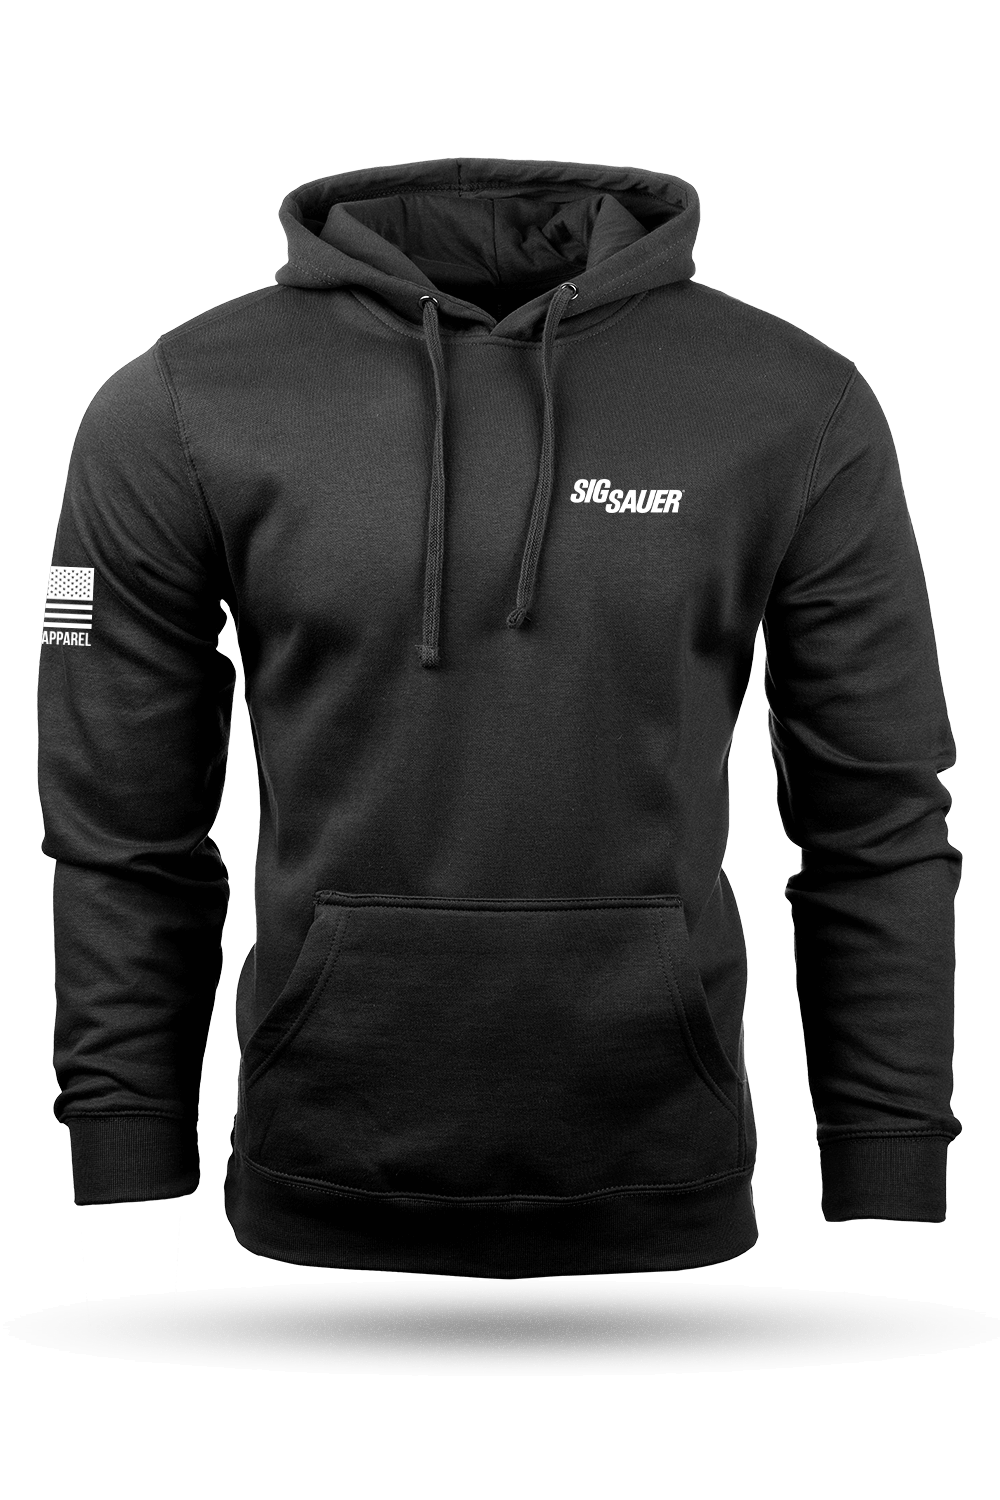 Hoodie - Sig Sauer Never Settle